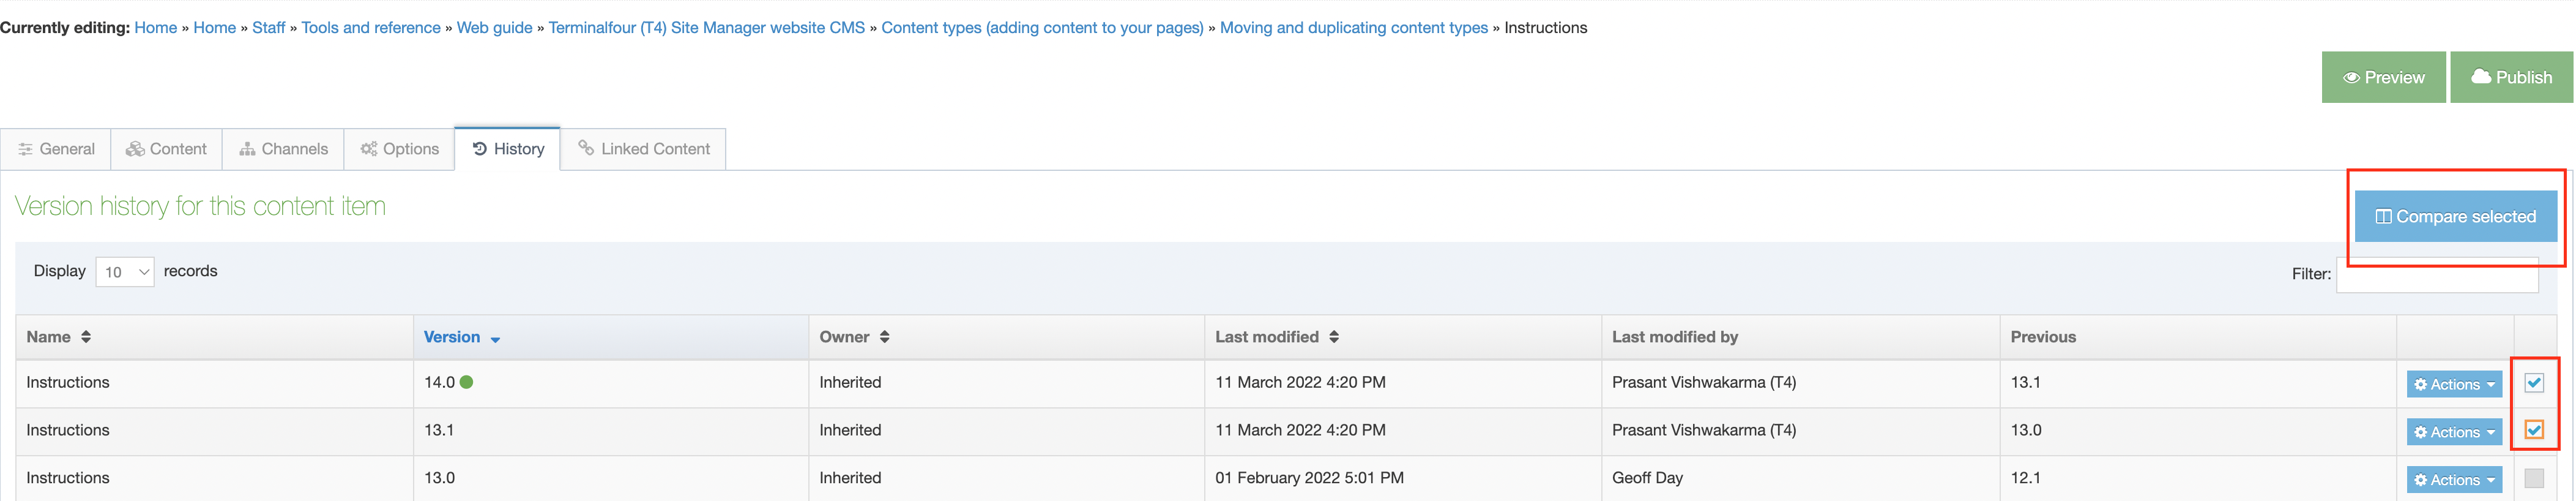 Compare versions in content History tab